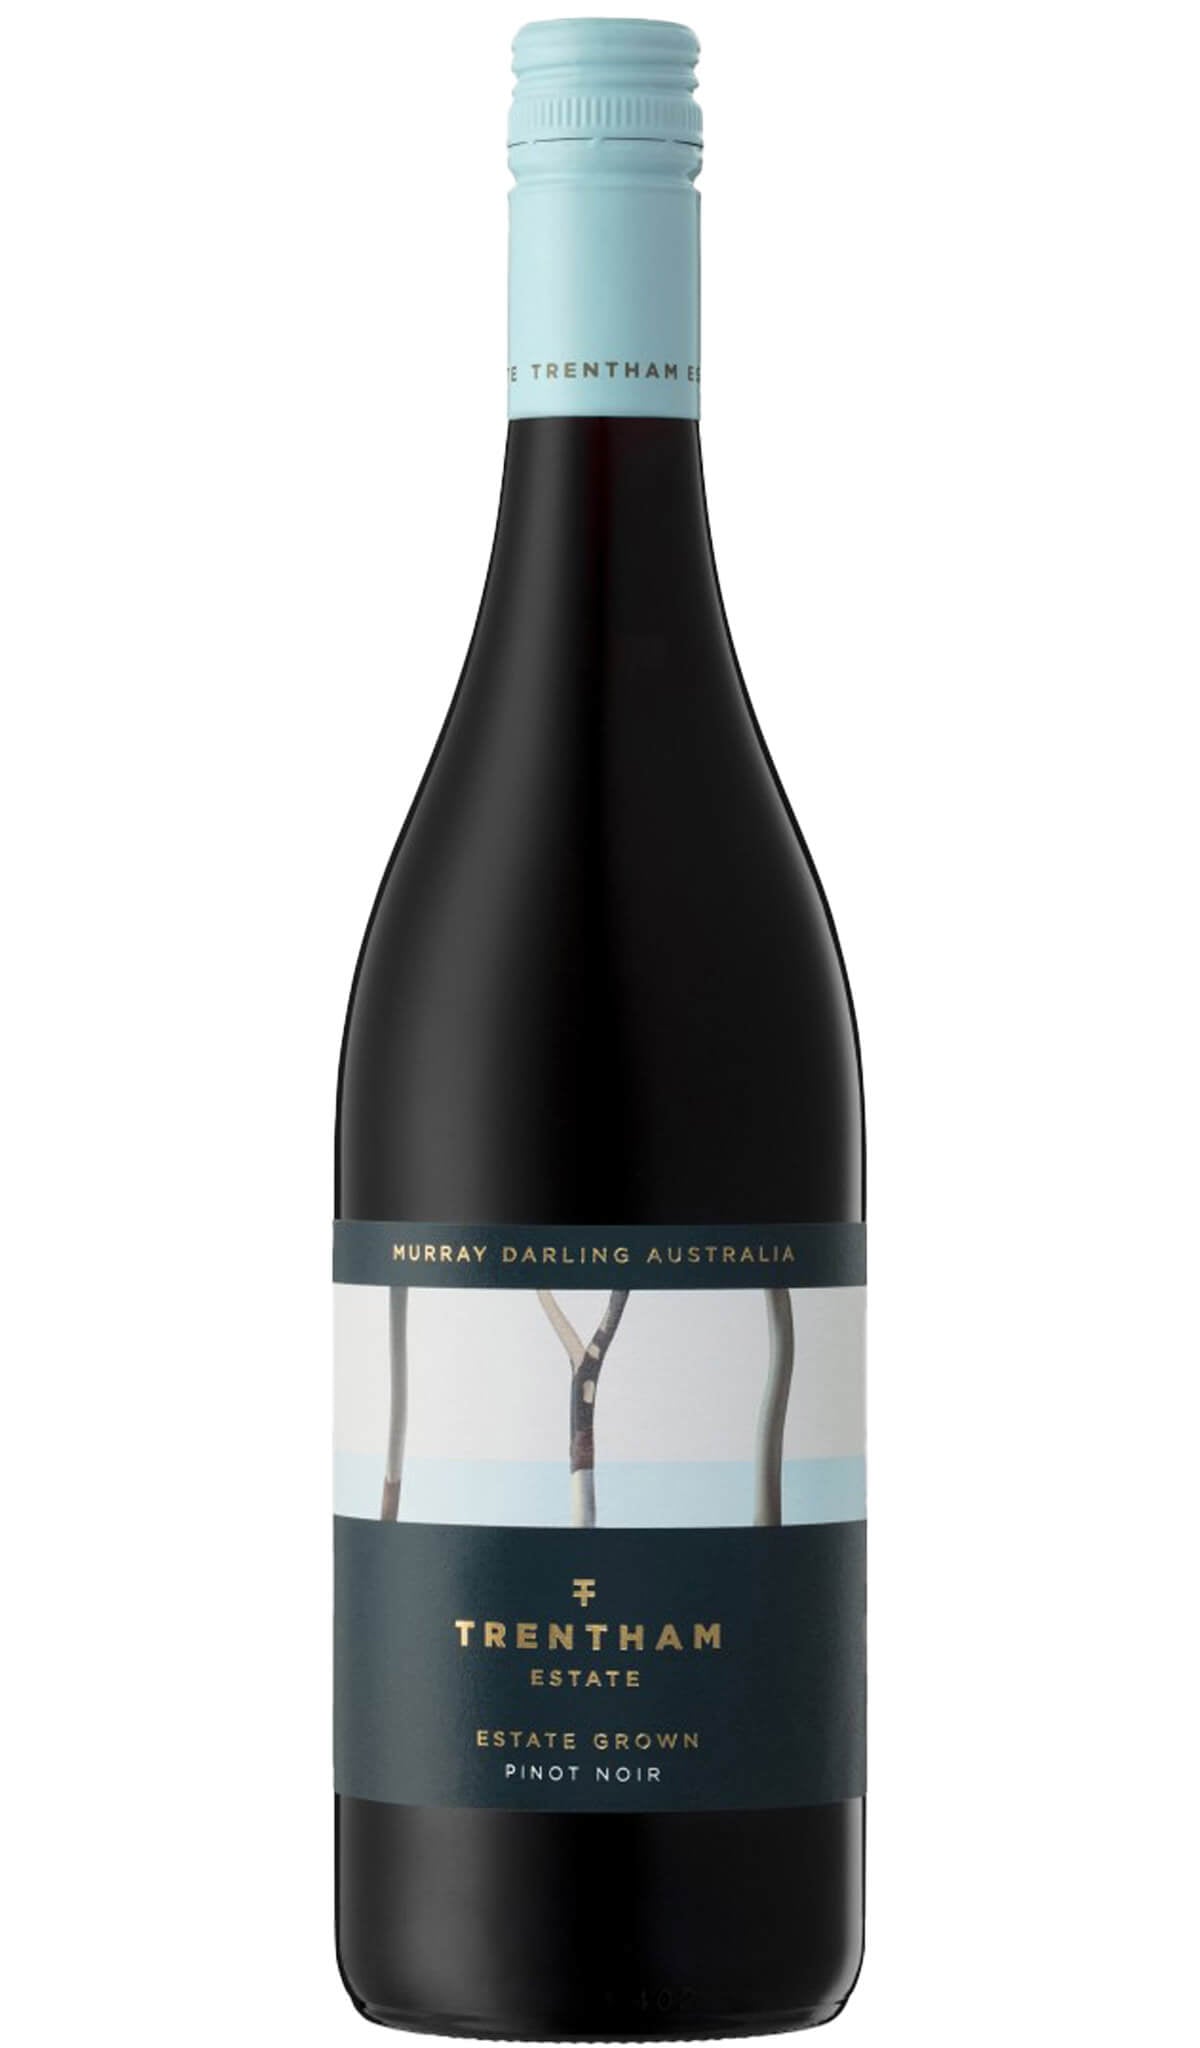 Find out more or buy Trentham Estate Pinot Noir 2022 (Murray Darling) online at Wine Sellers Direct - Australia’s independent liquor specialists.